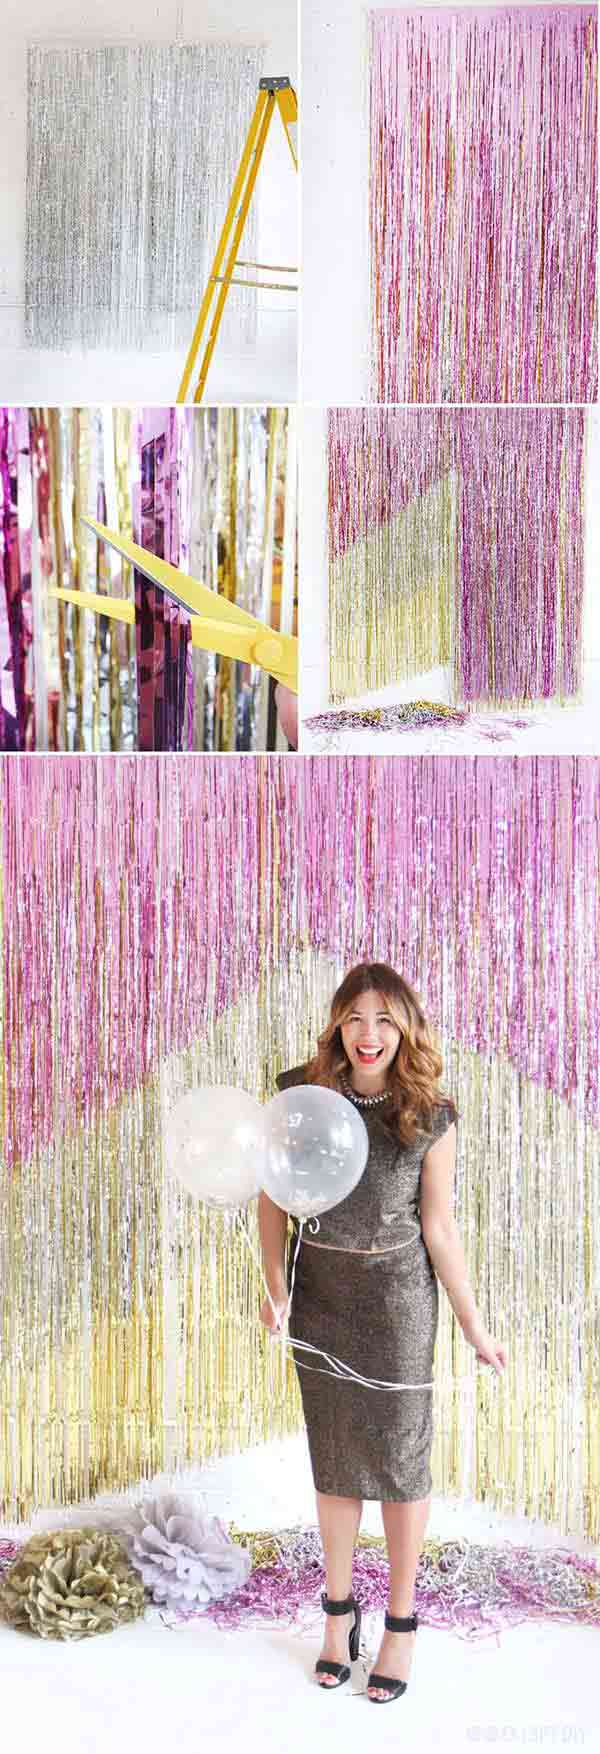 diy-new-year-eve-decorations-13-2